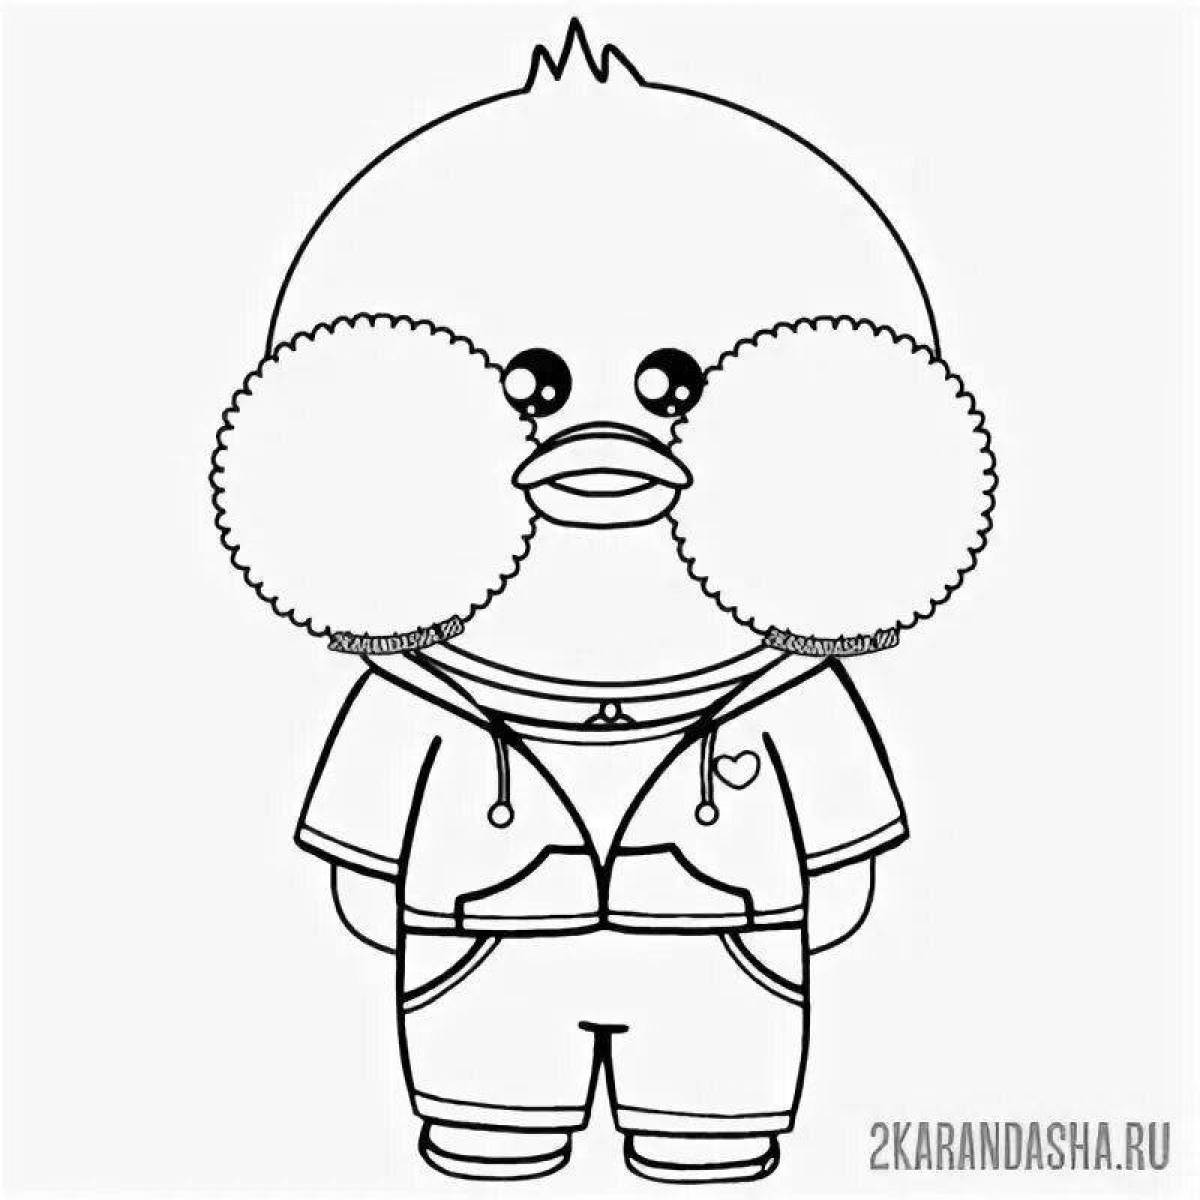 Lafanfan magic duck coloring page